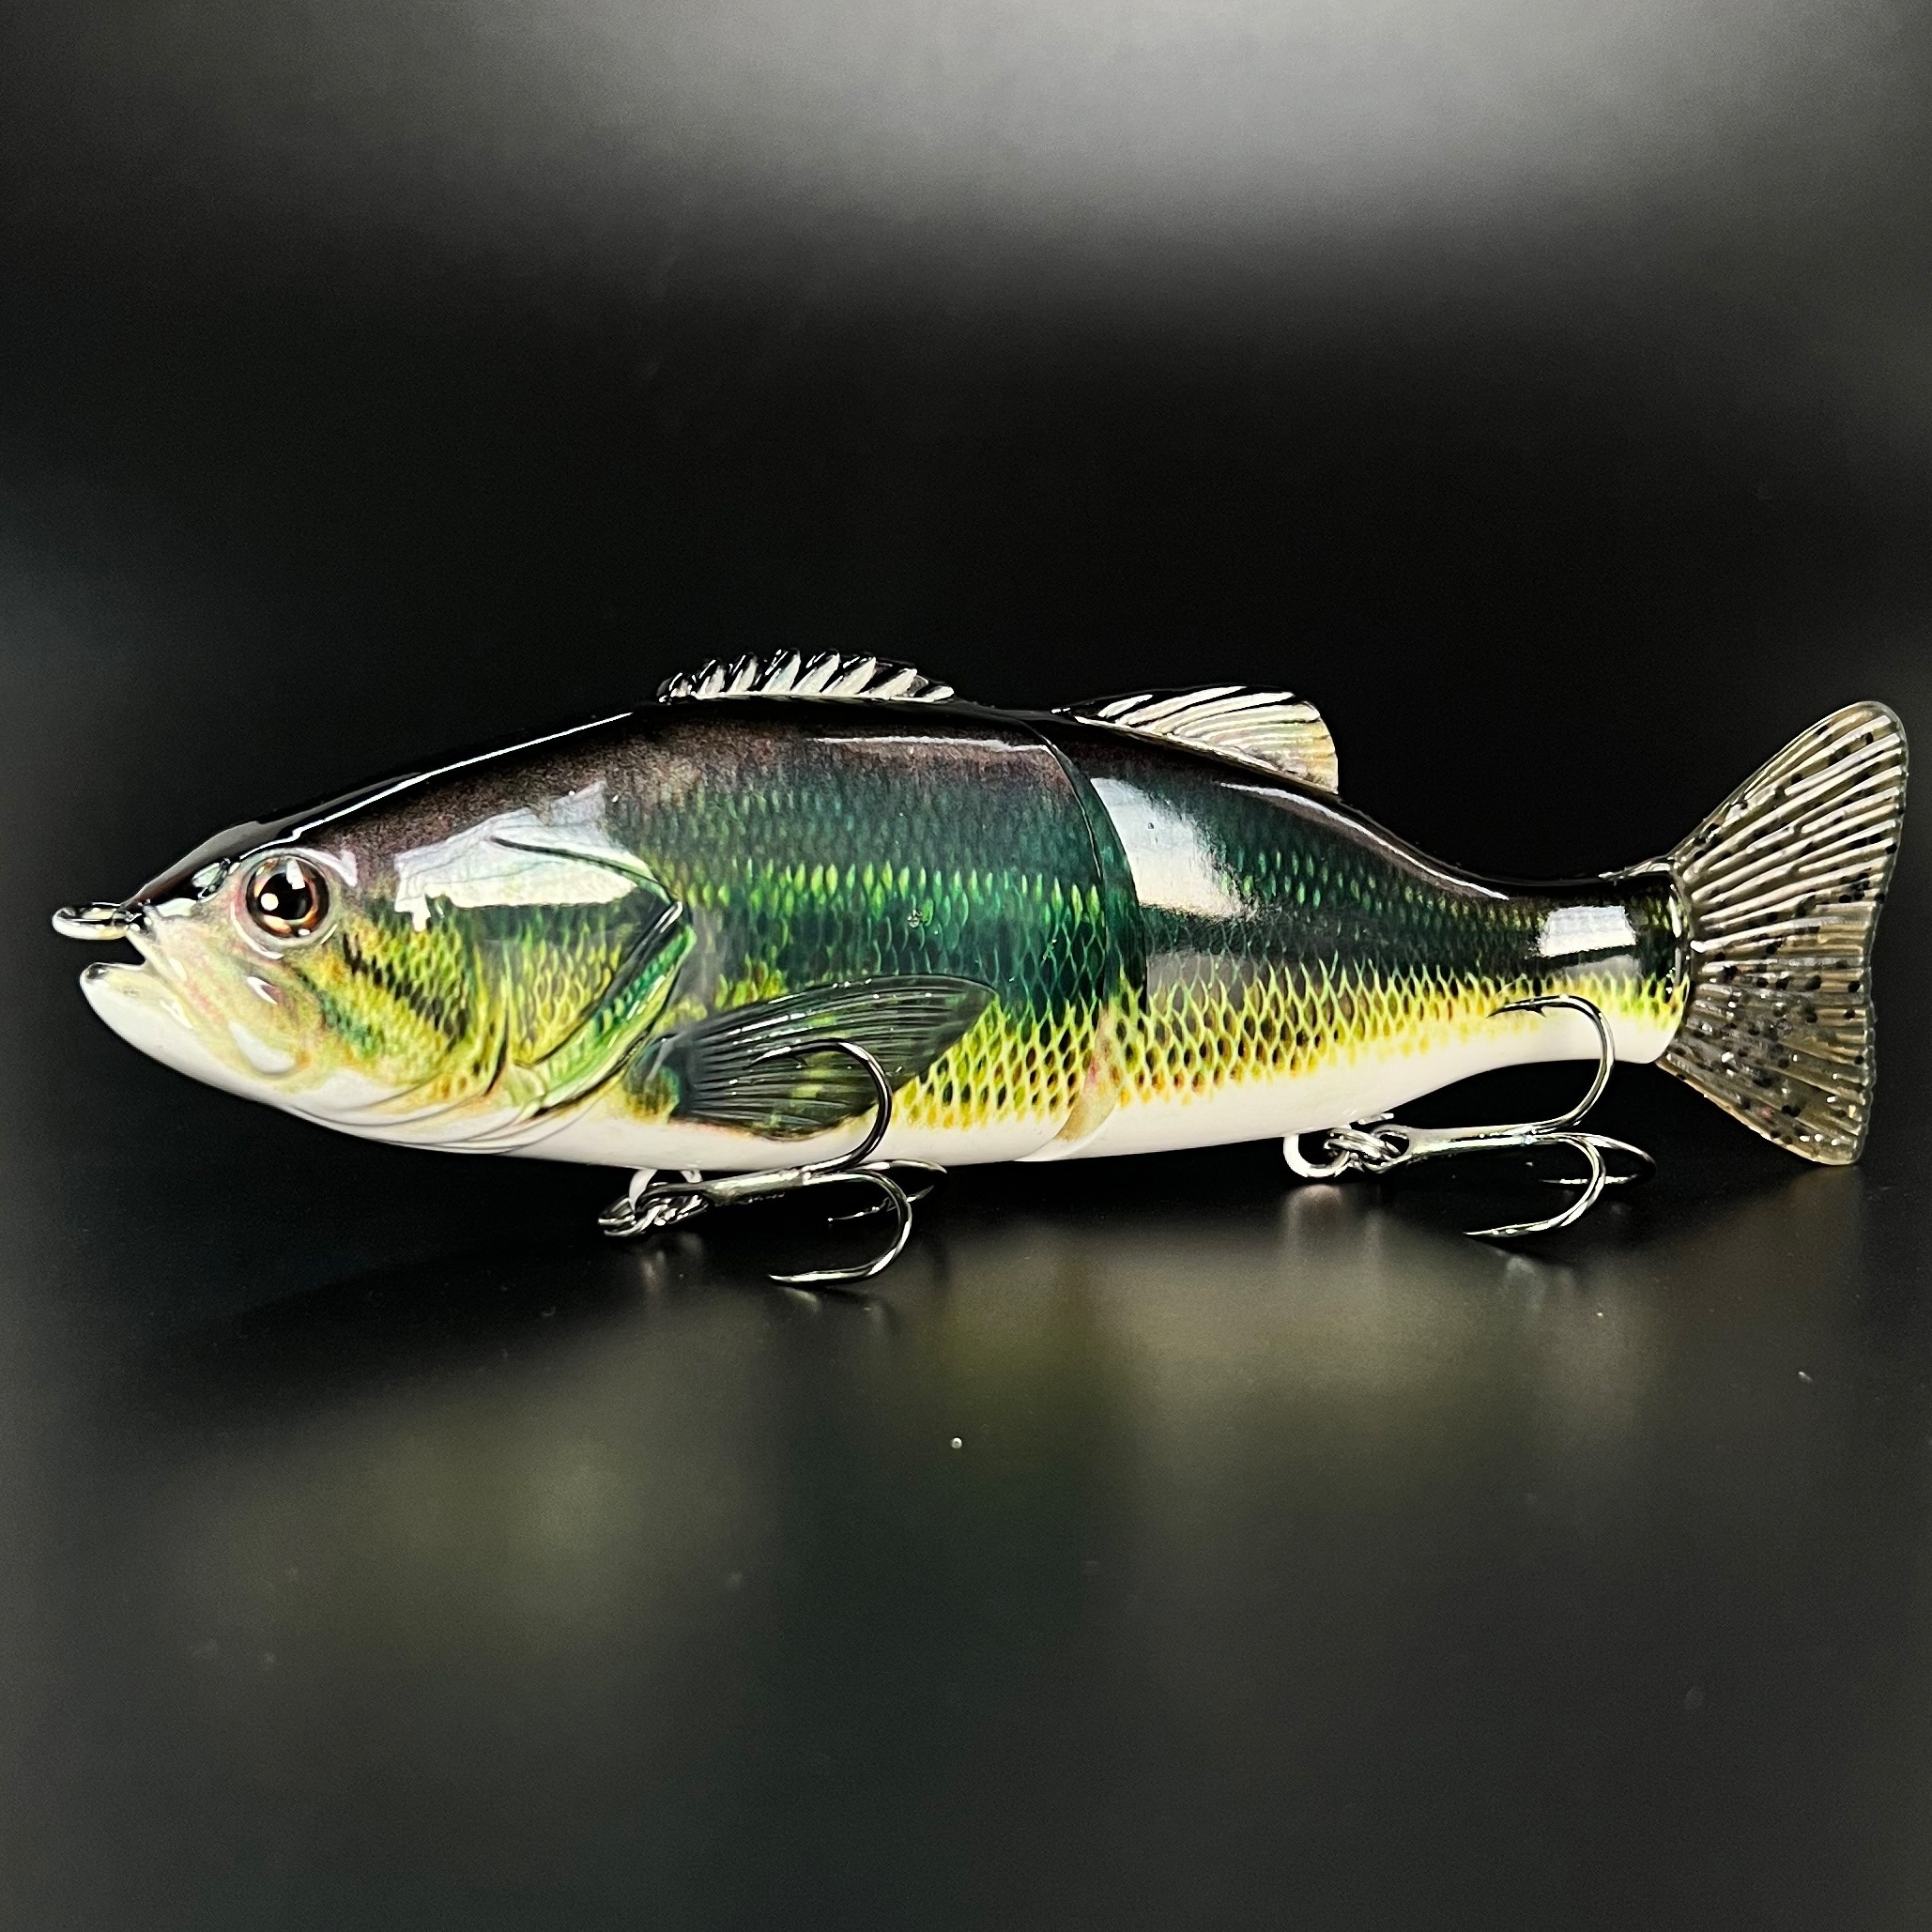 1pc 6.3inch-1.38oz Bionic Simulation Bass Fishing Lures For Freshwater &  Saltwater, Multi-Jointed Artificial Hard Swimbaits For Trout Salmon Catfish